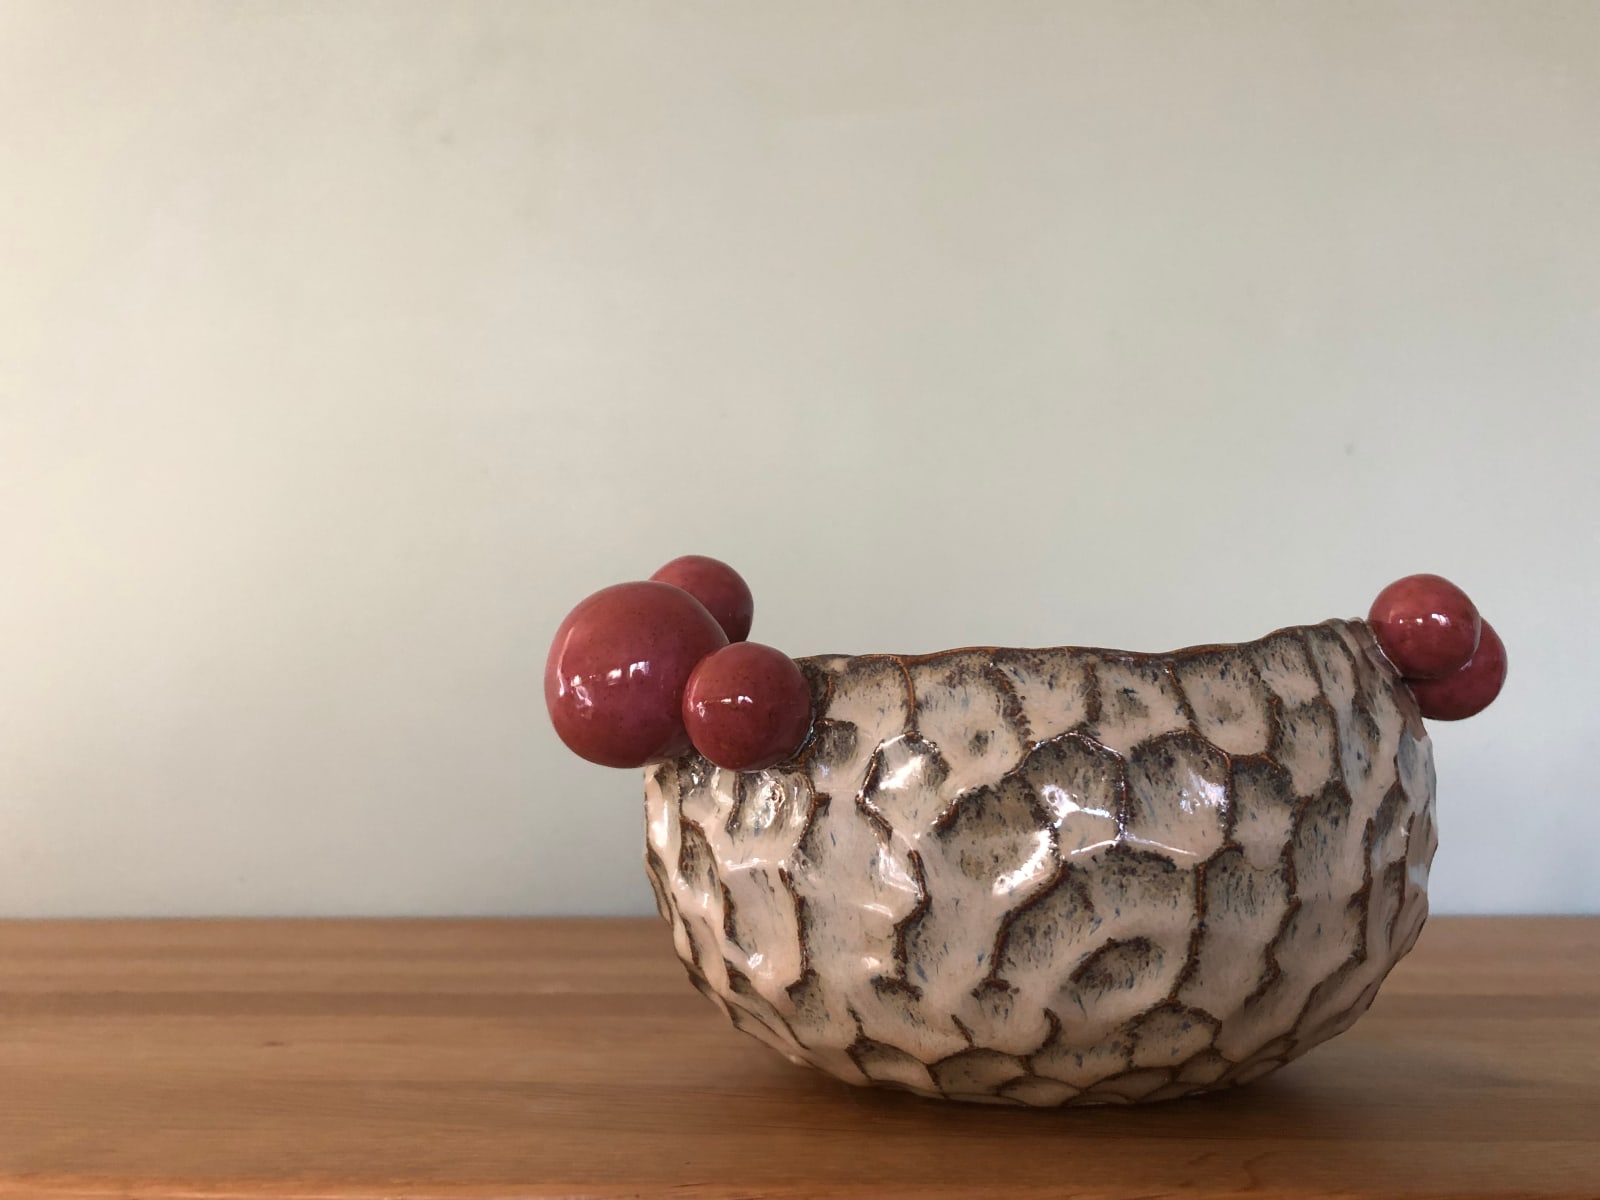 Lois Carson, Carved bowl - pink balls